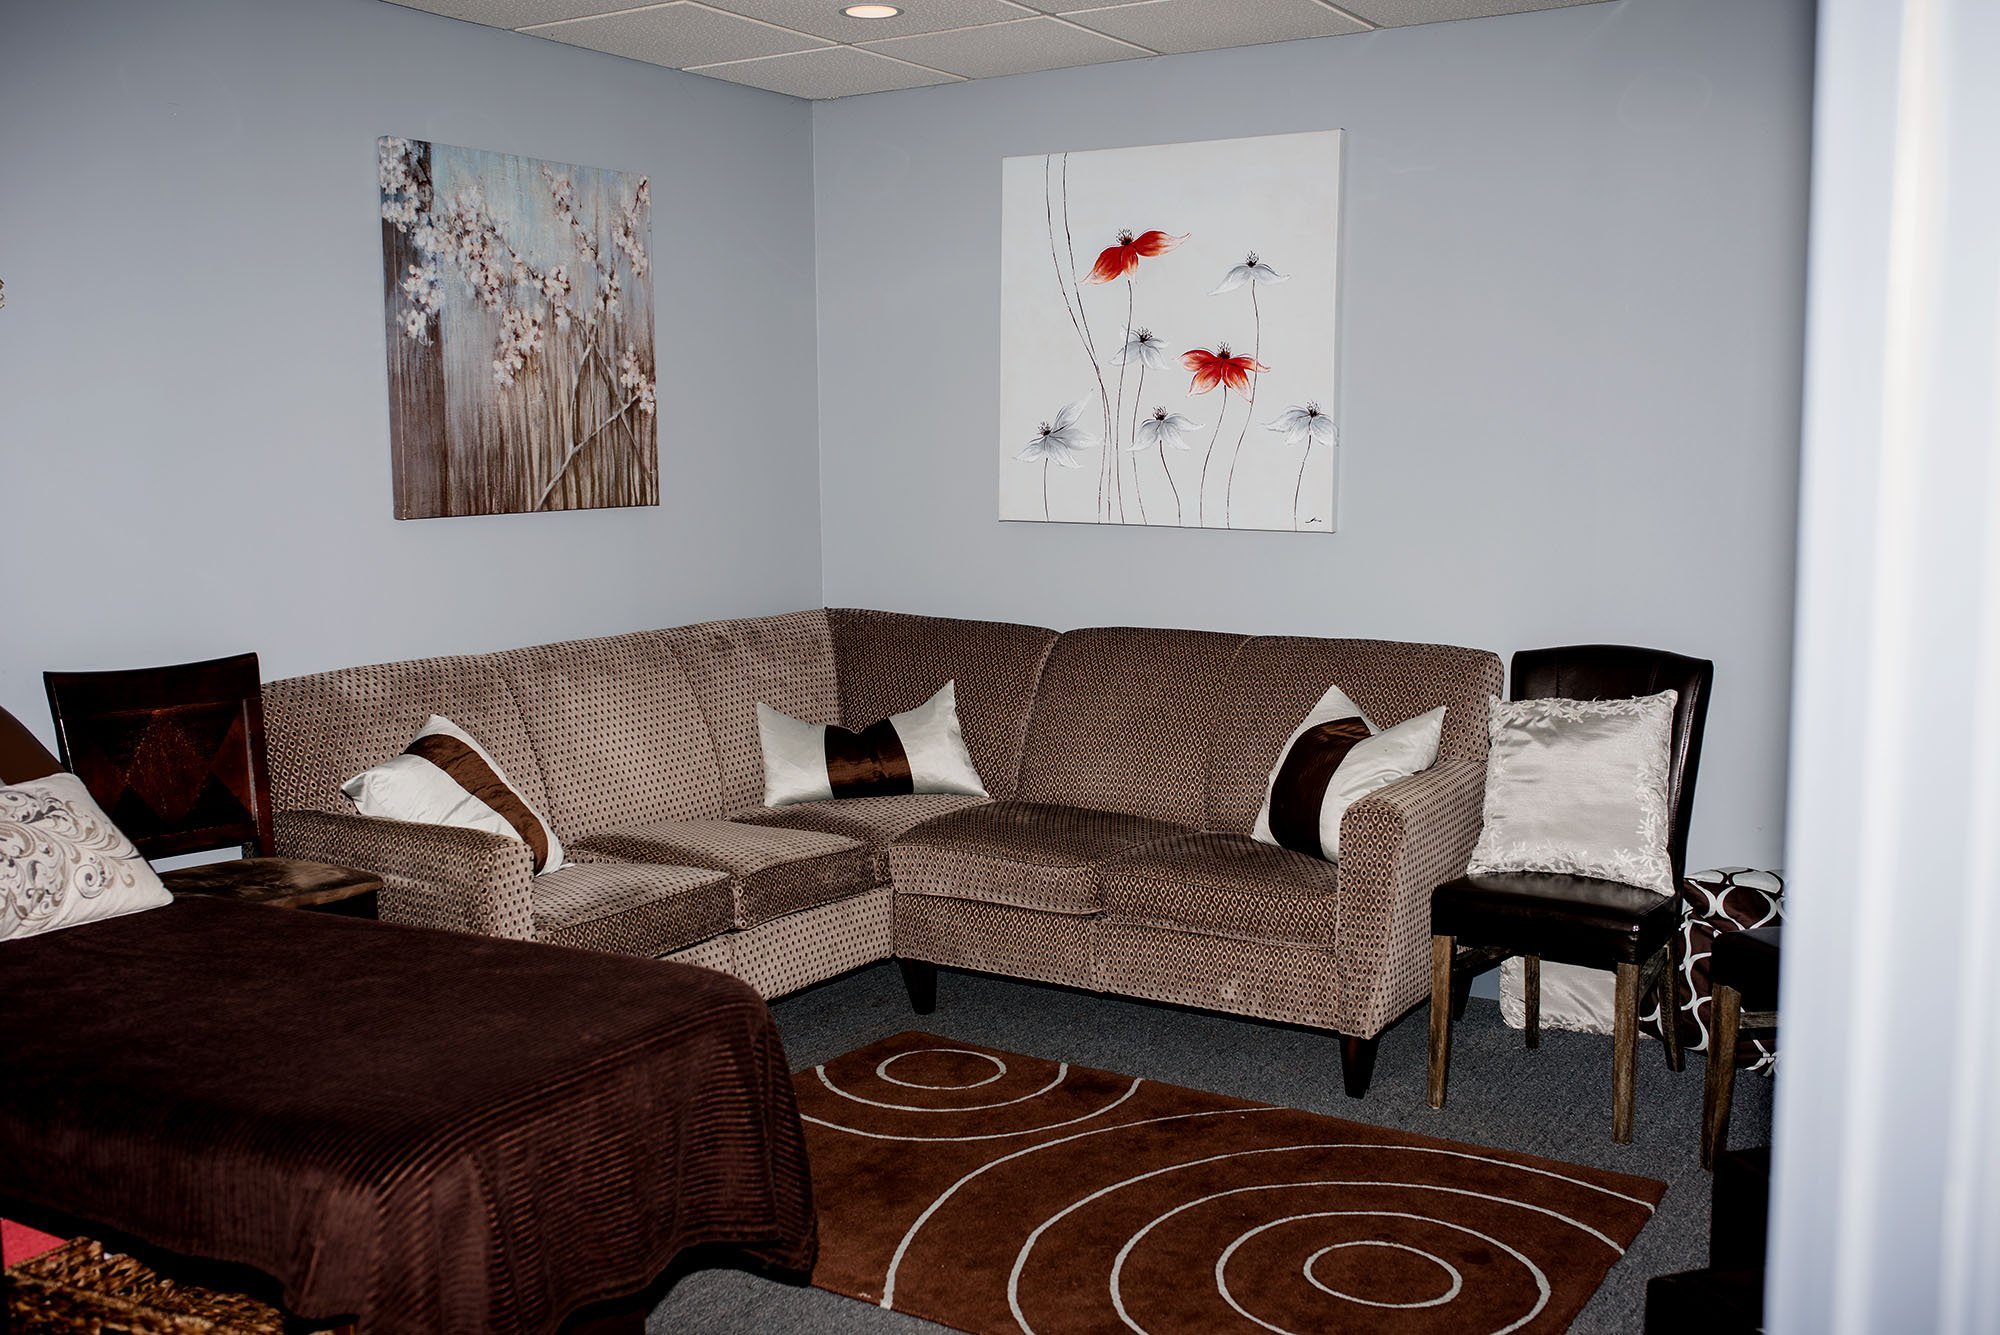 extra seating for your family and friends in the ultrasound room at A Tiny Perspective 3d & 4d Ultrasound provider